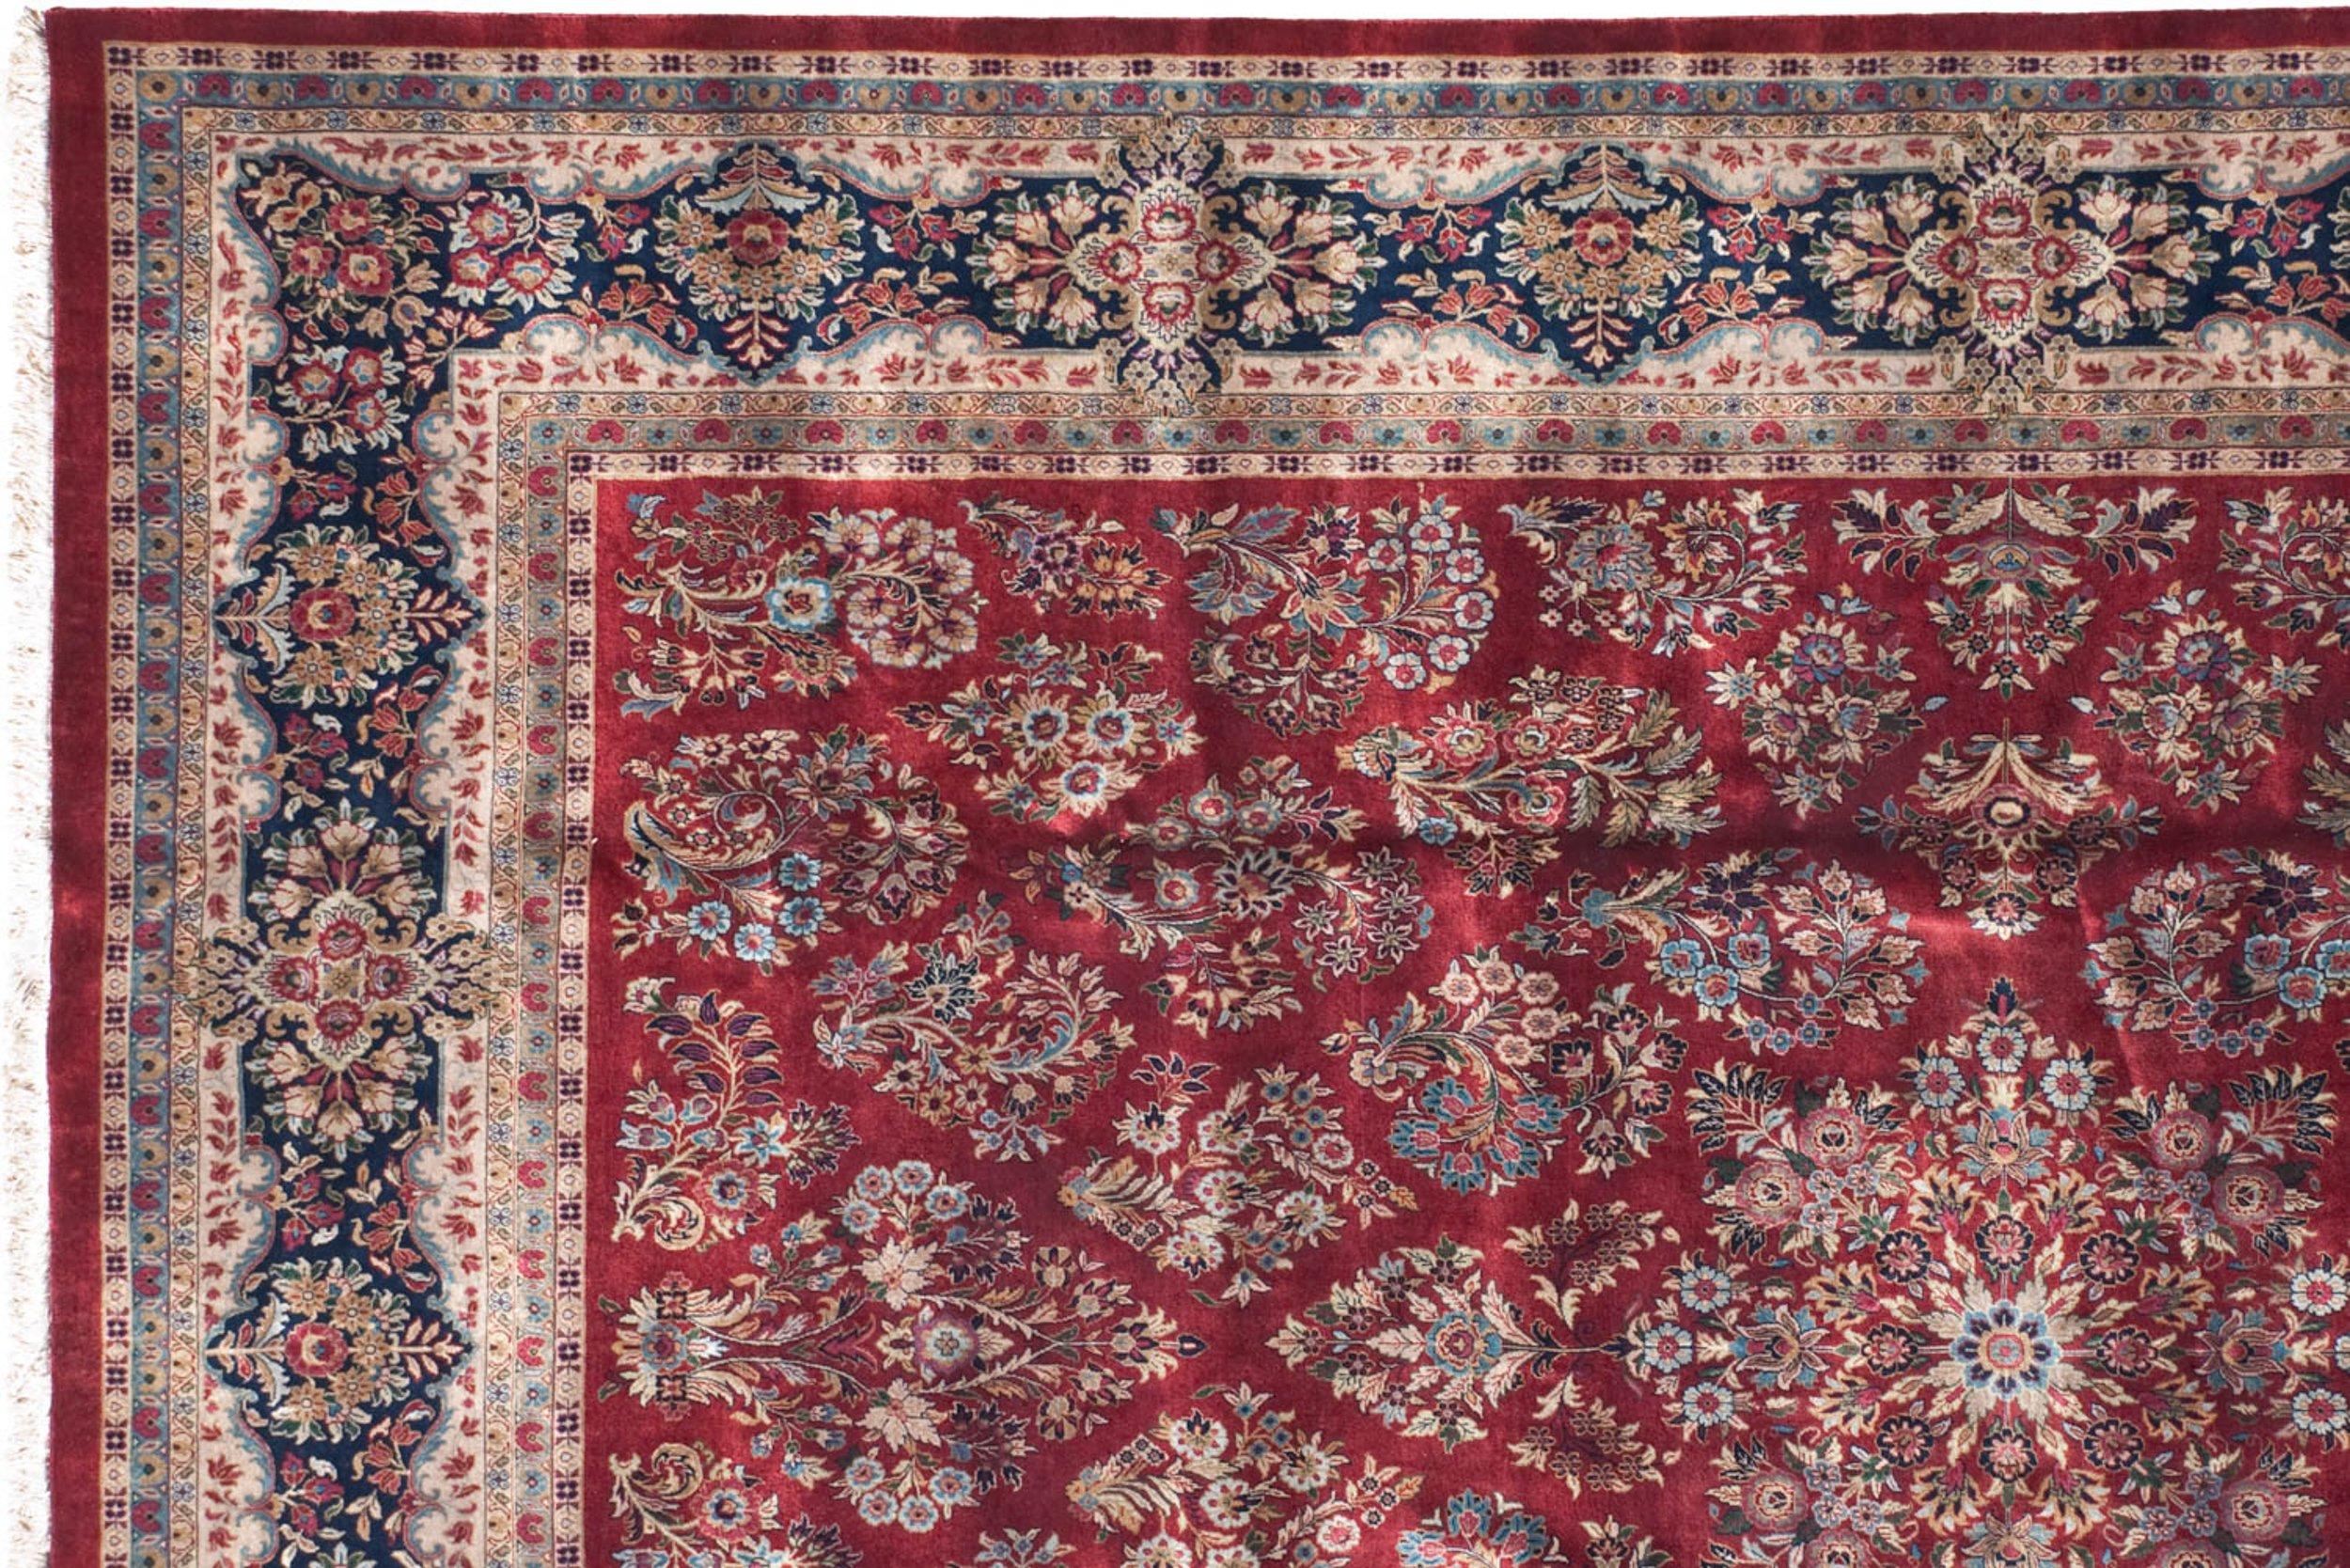 Fine example in both wool and weave bearing allover covered floral sprays and bouquets bearing detailed buds and blossoms wrapped by a shadow cartouche main border defined by design density and general contour. High luster wool in great quality adds